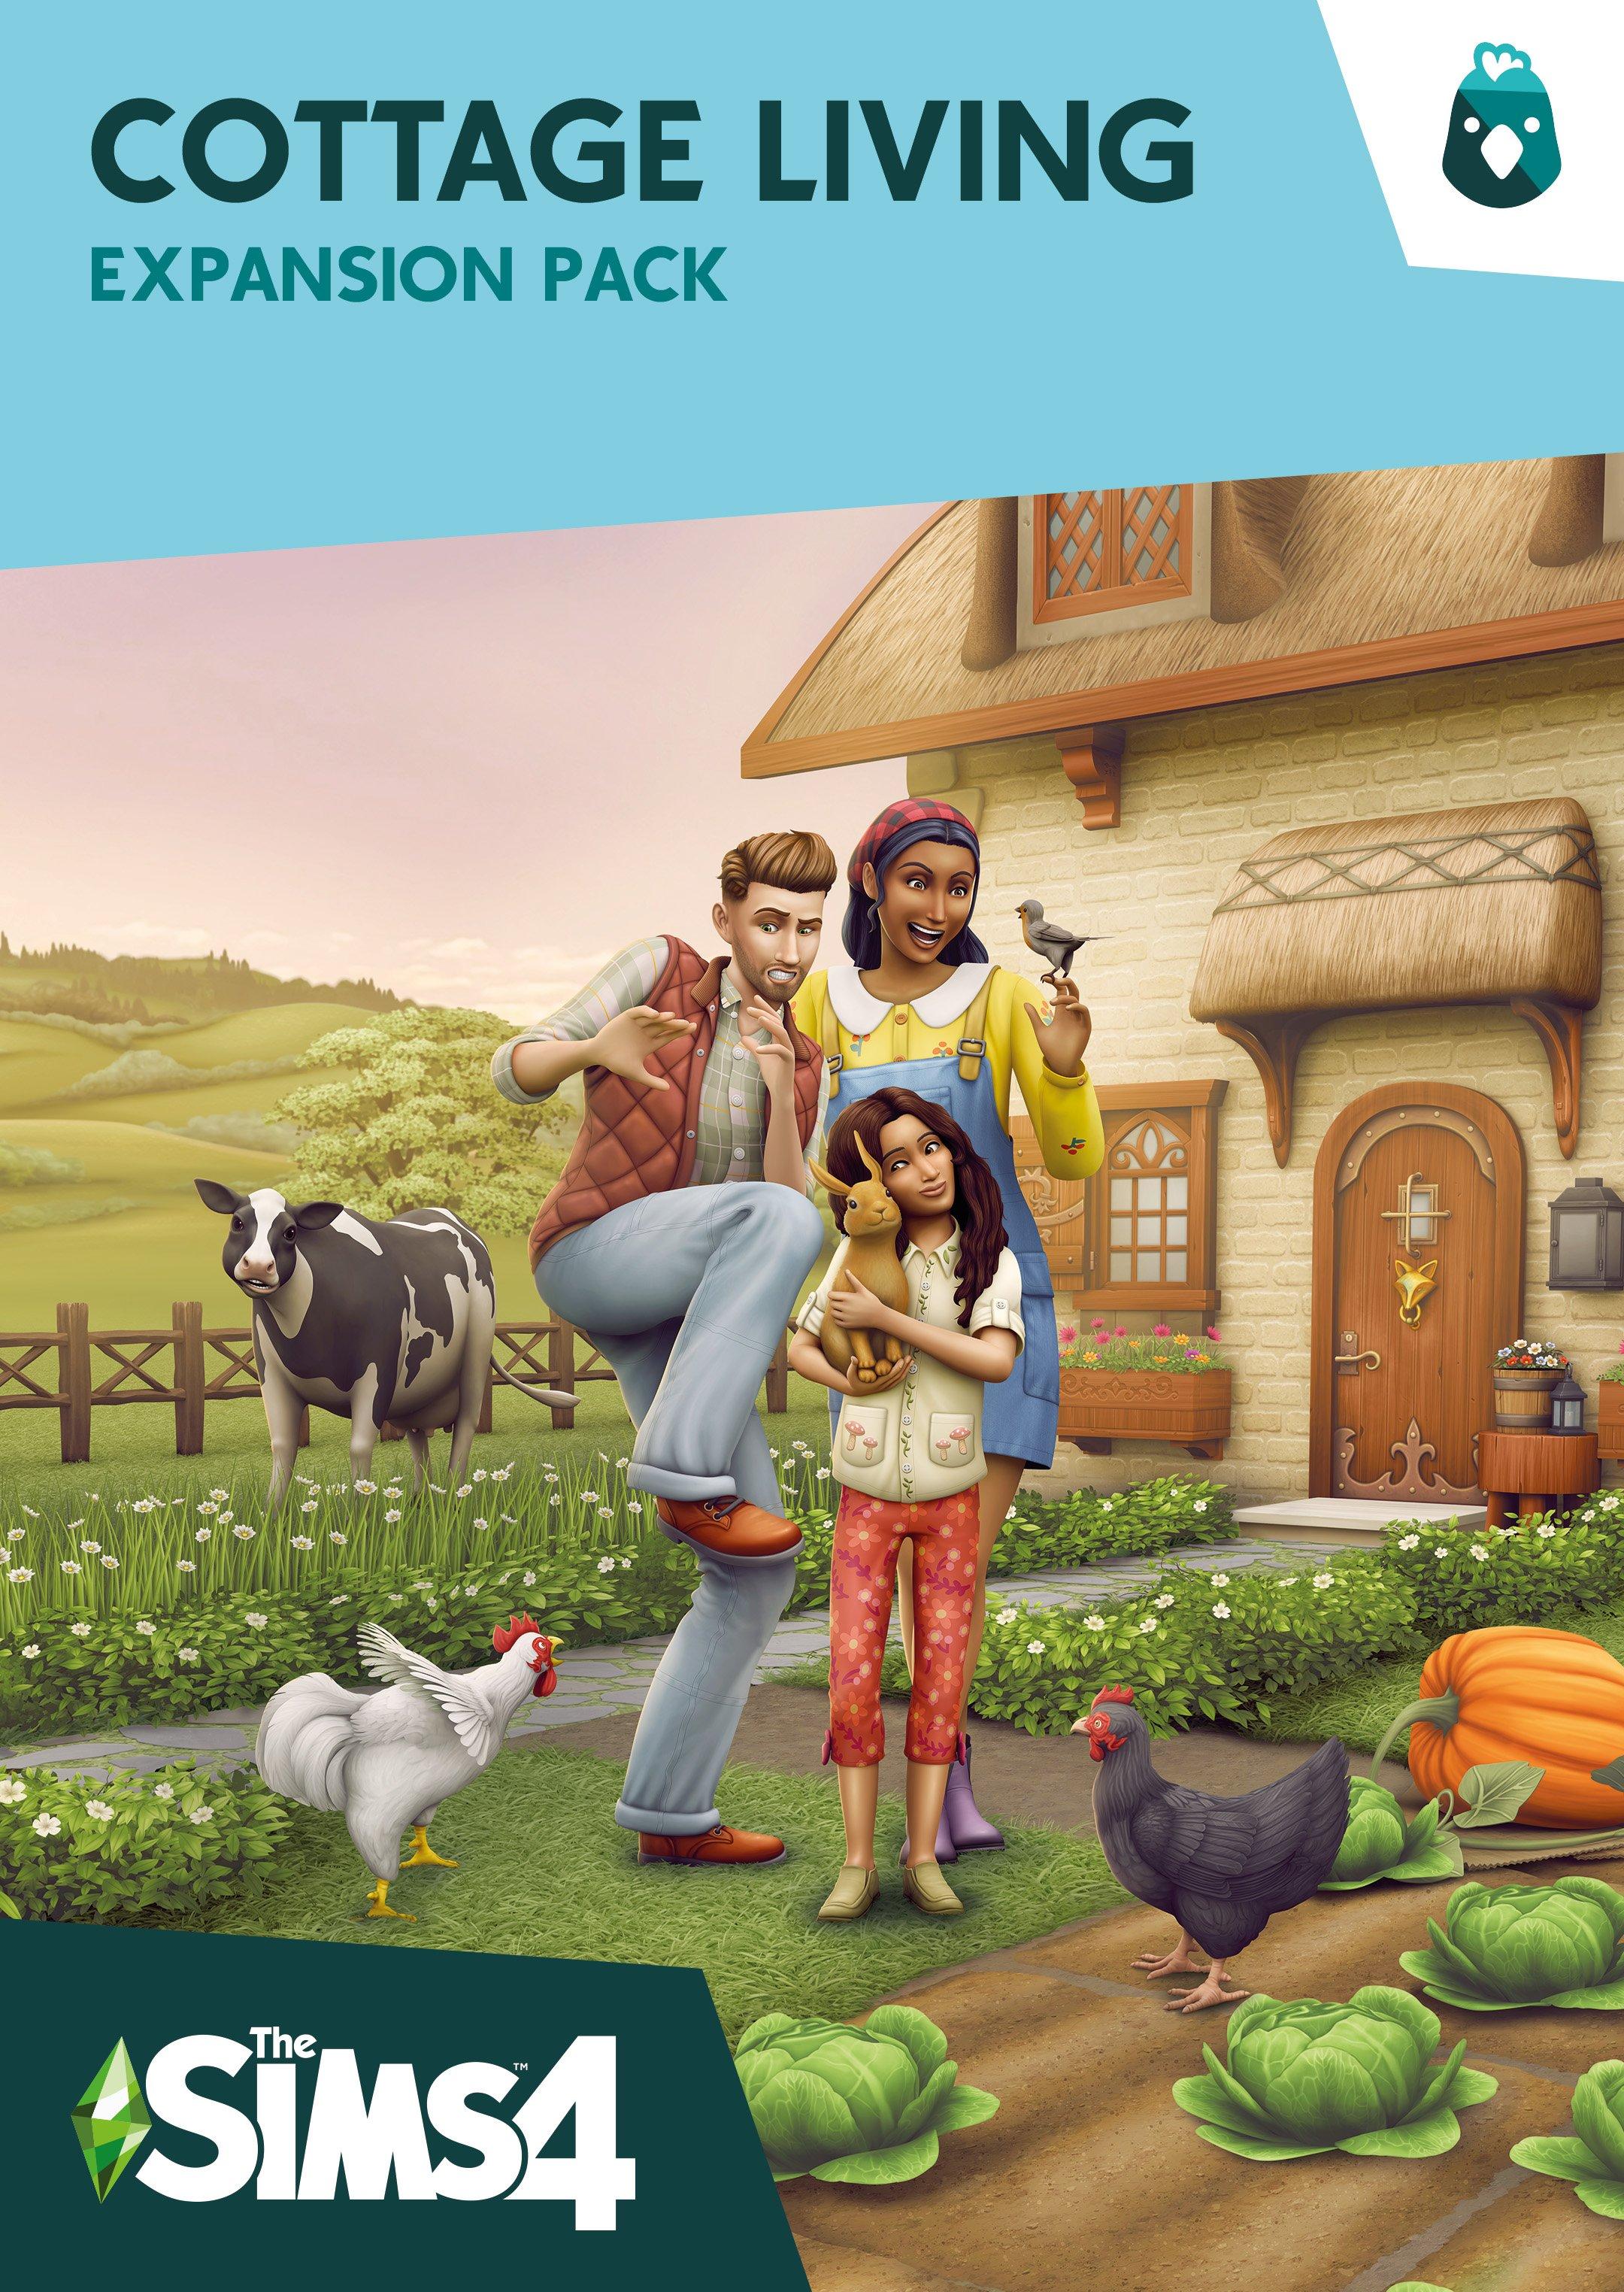 Where can I download sims 4 DLCs for…free? :) I've already bought